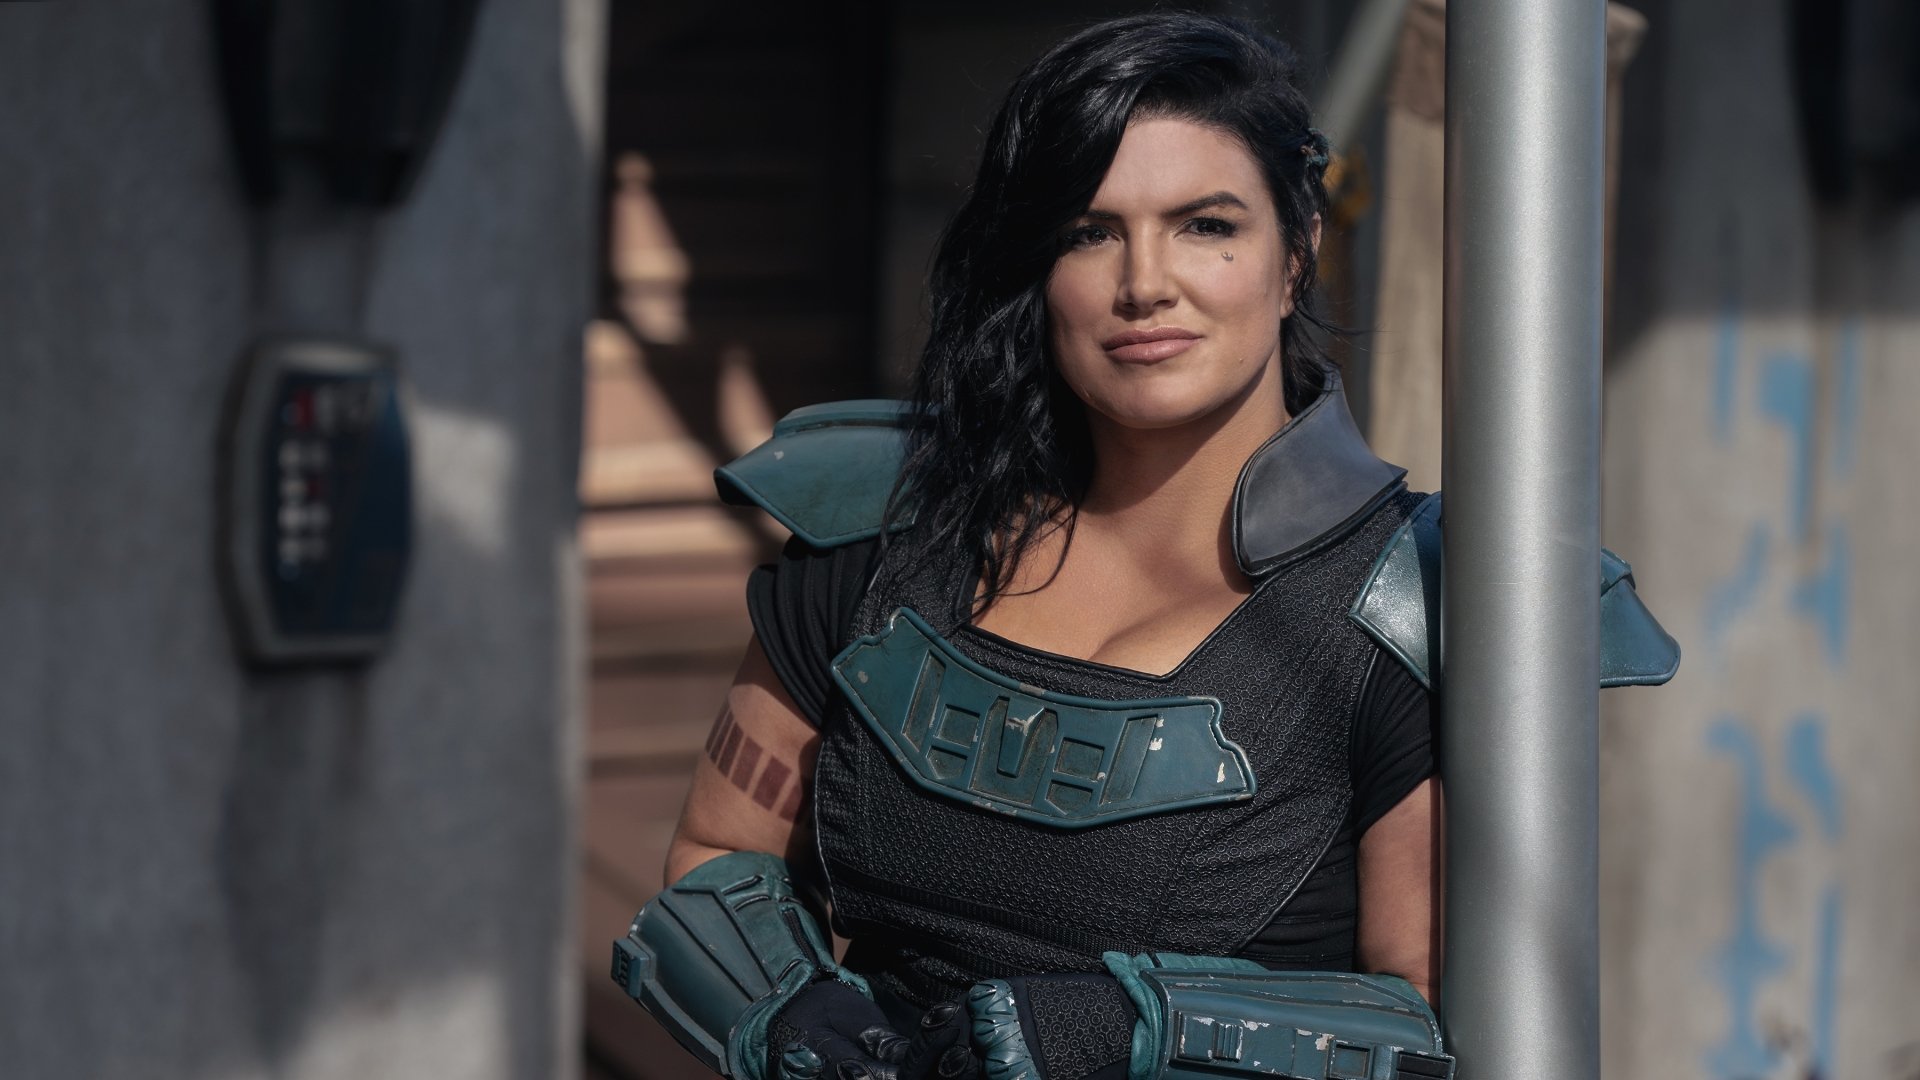 Why Gina Carano Hasn’t Been Fired From The Mandalorian Yet